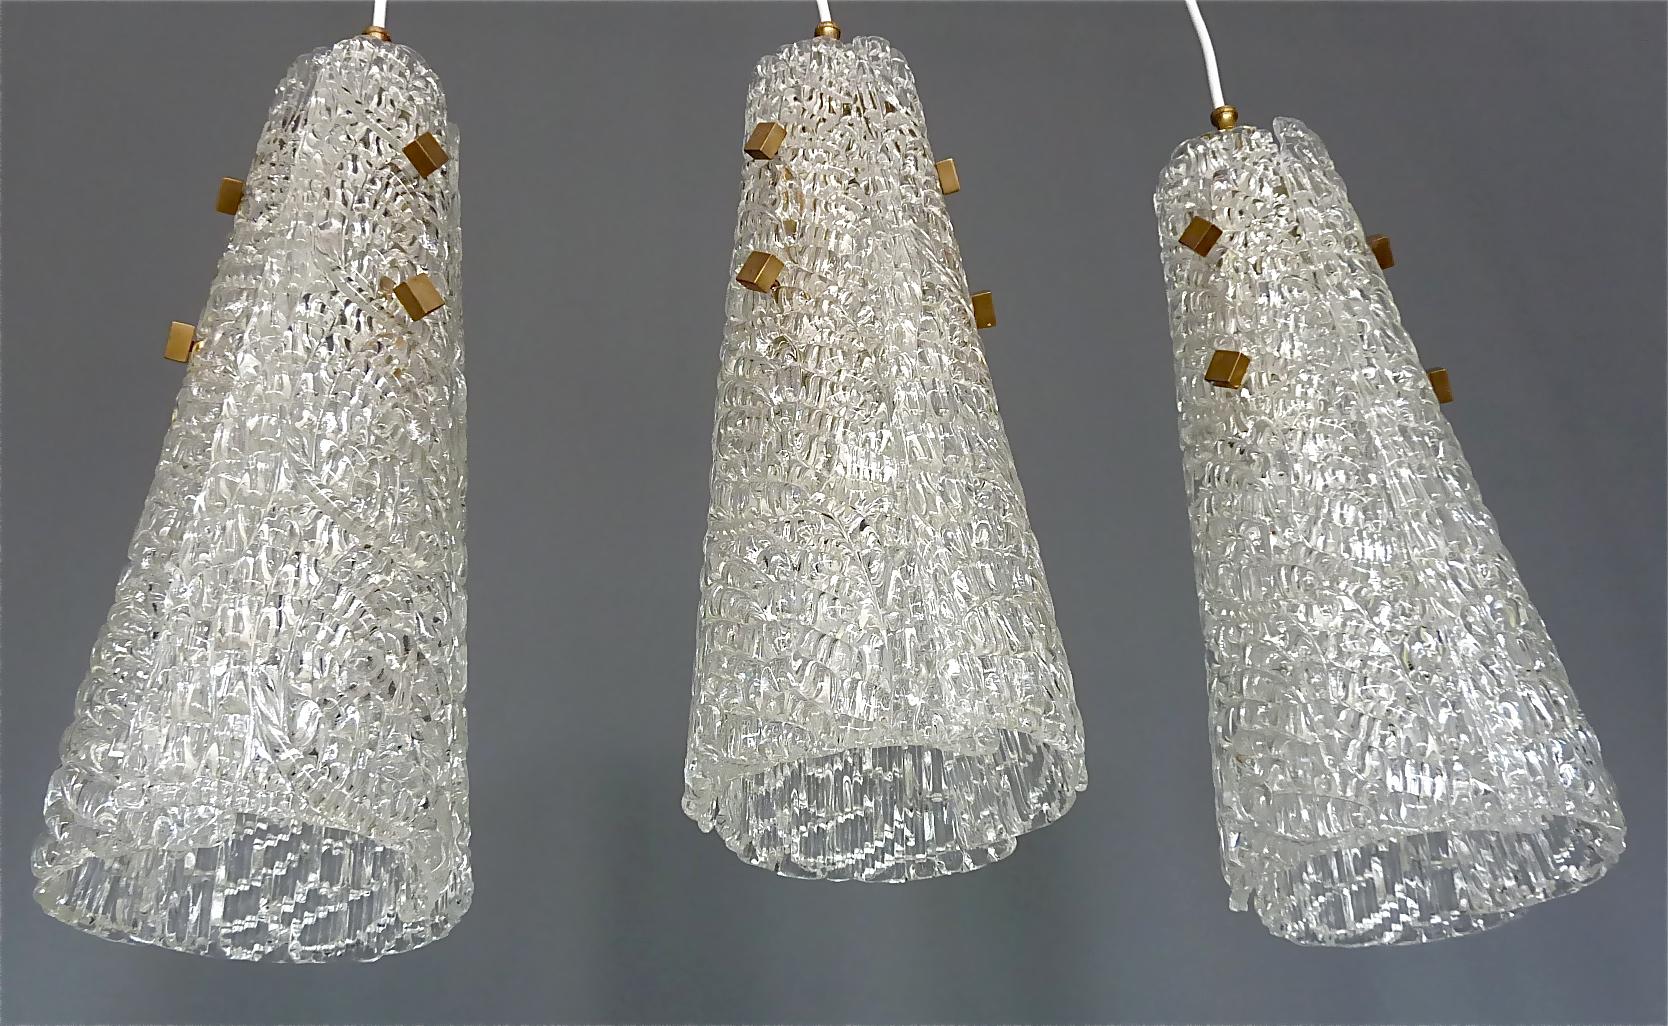 Set of 3 Large Paolo Venini Lamps Textured Murano Ice Glass Brass 1950 Kalmar For Sale 2